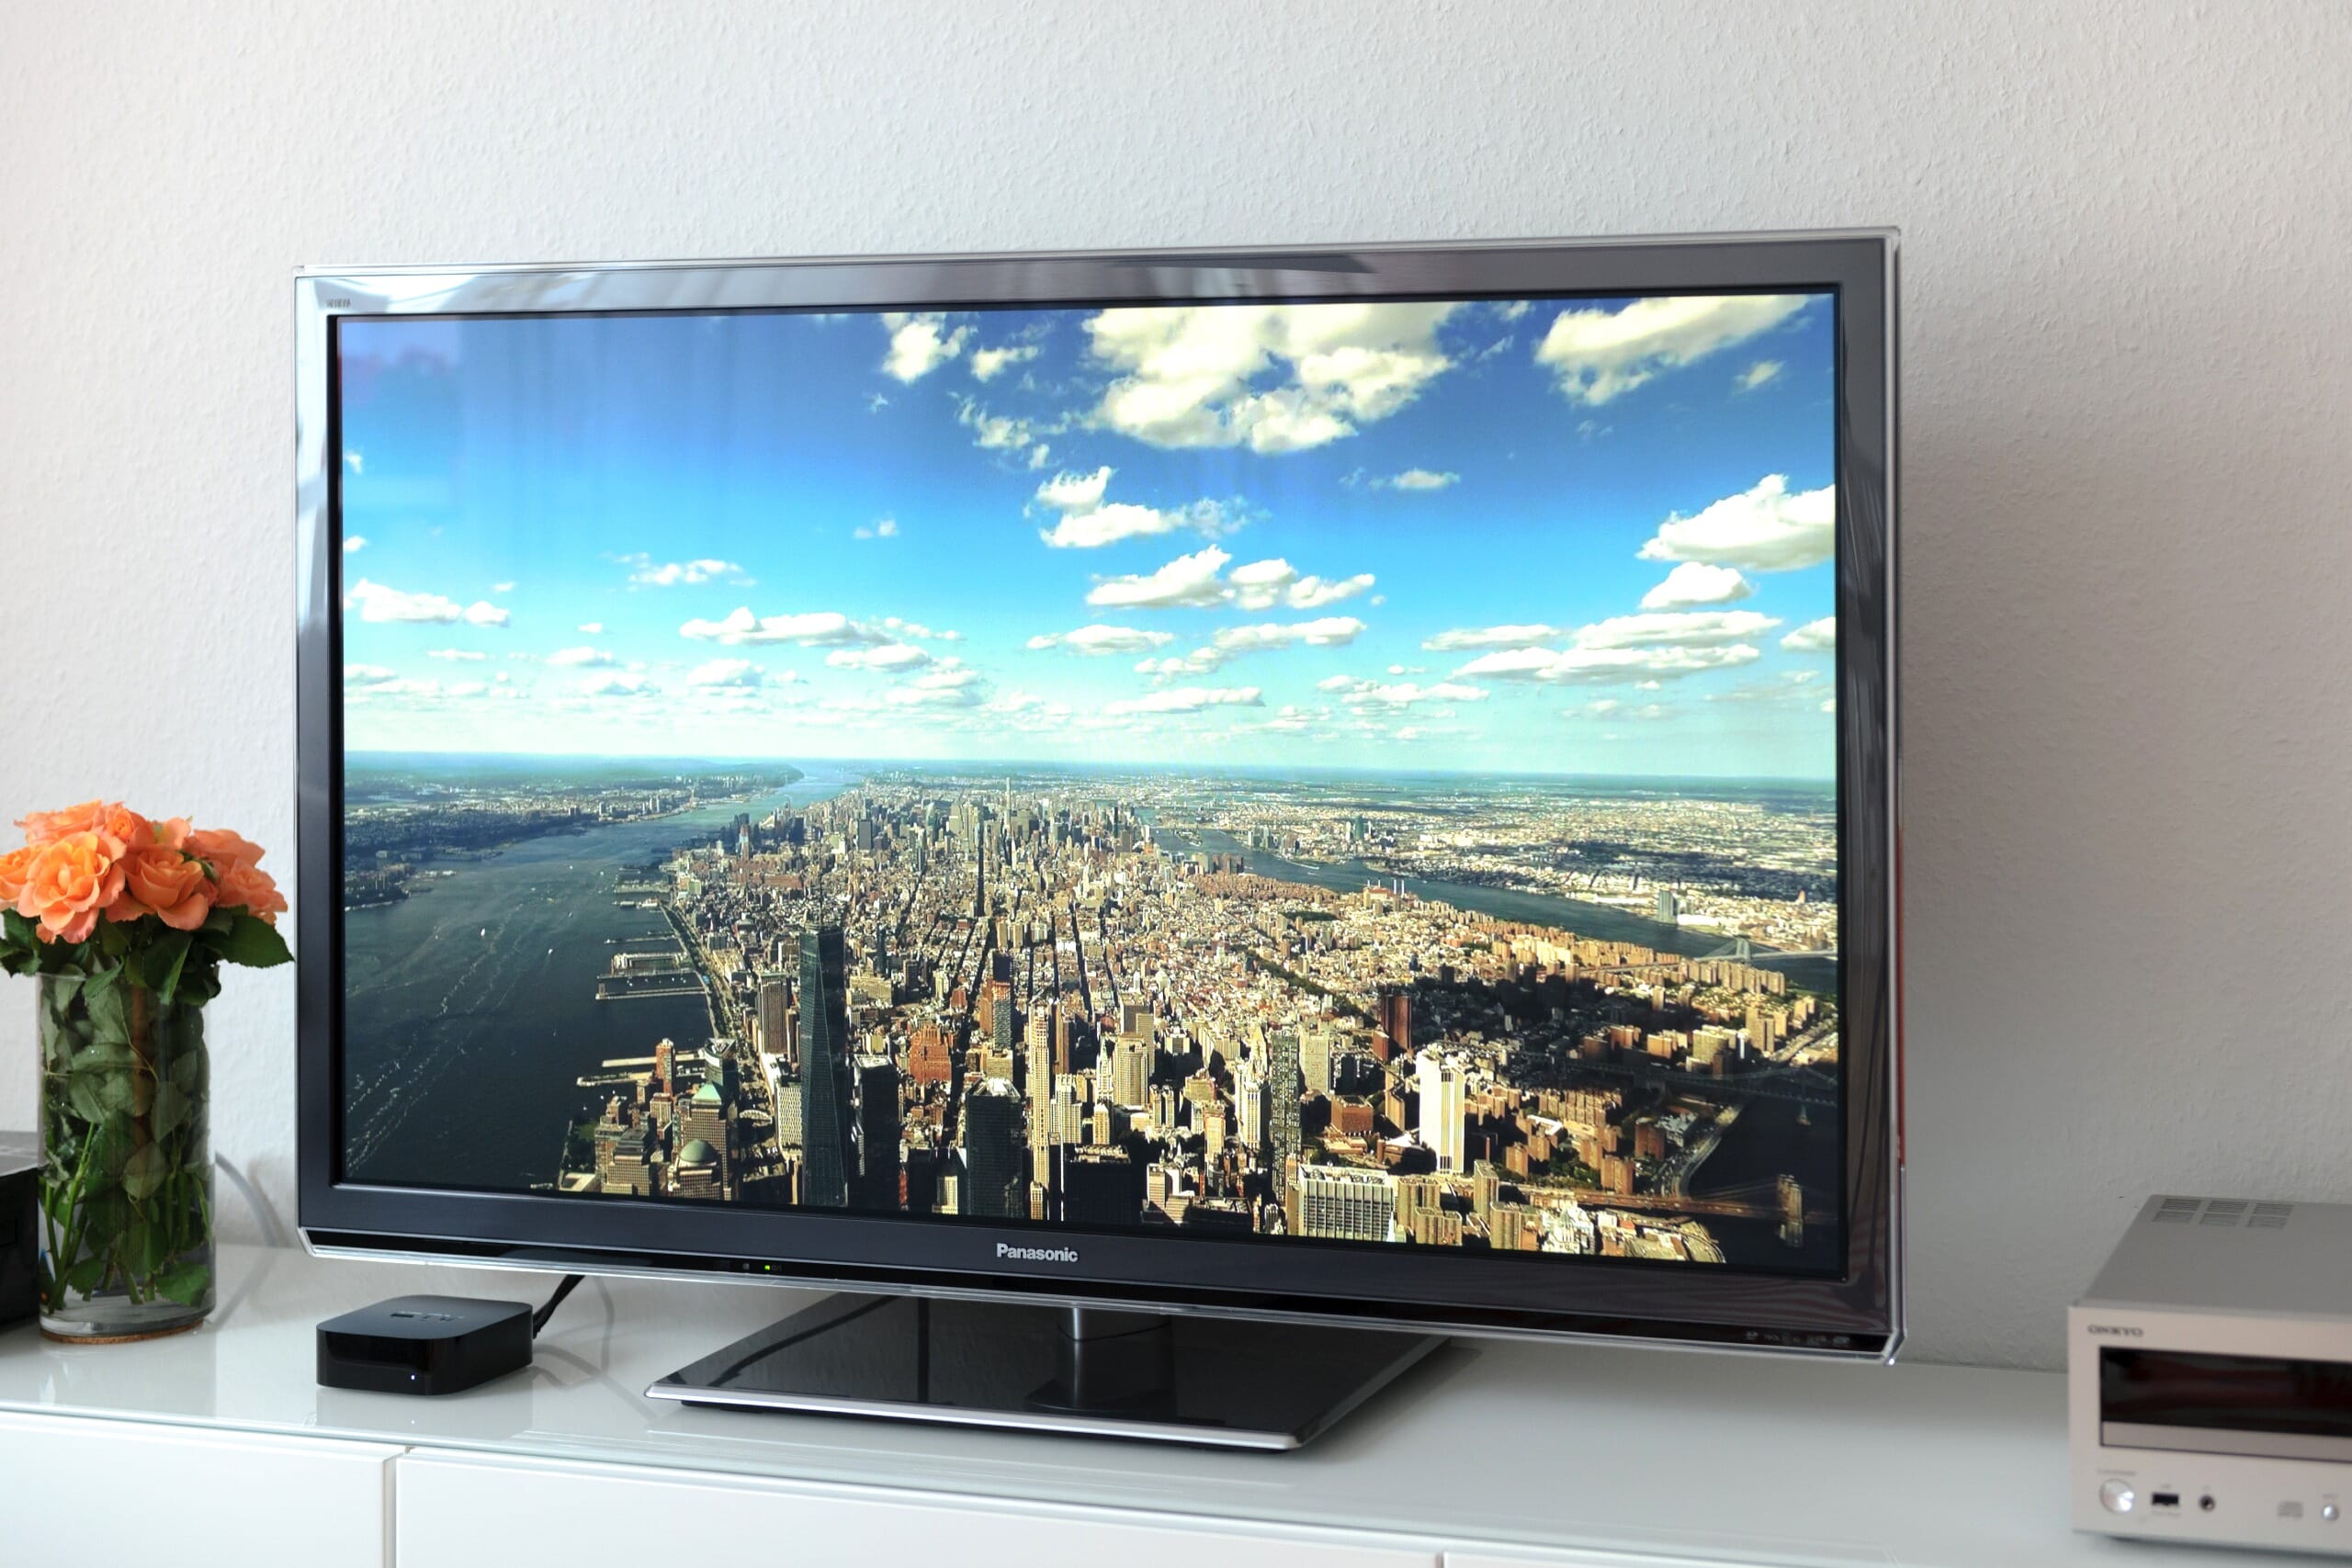 Best TVs for Photo Editing: Top 7 Screens to View and Edit Images